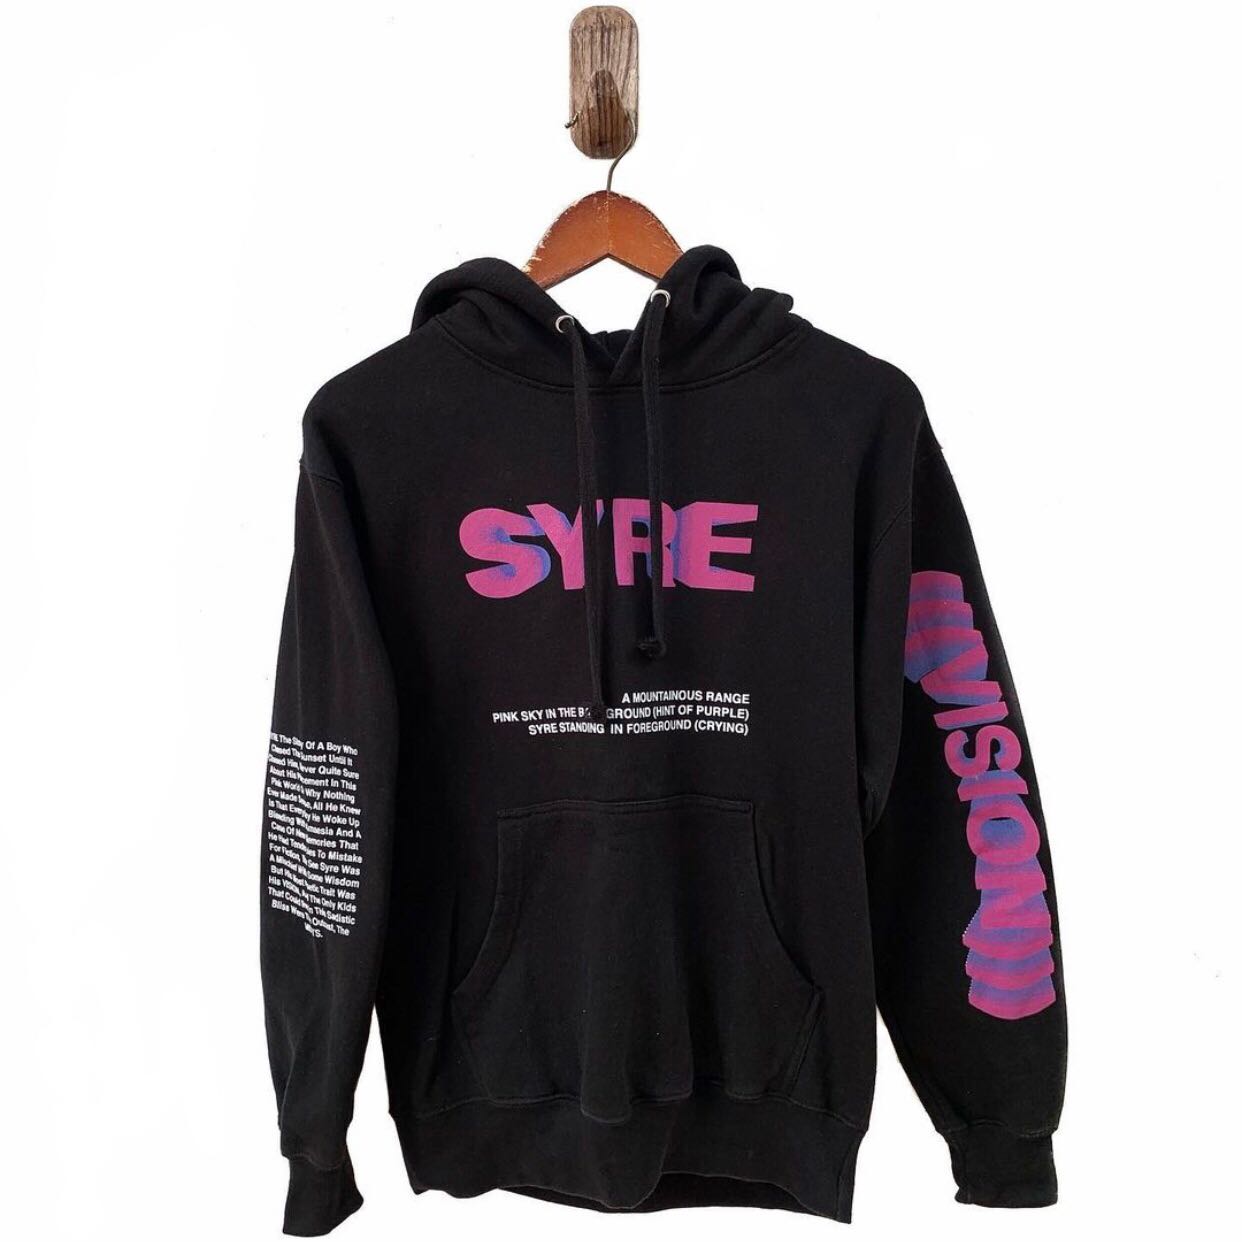 Syre Tour Jaden Smith Hoodie, Men's Fashion, Coats, Jackets and ...